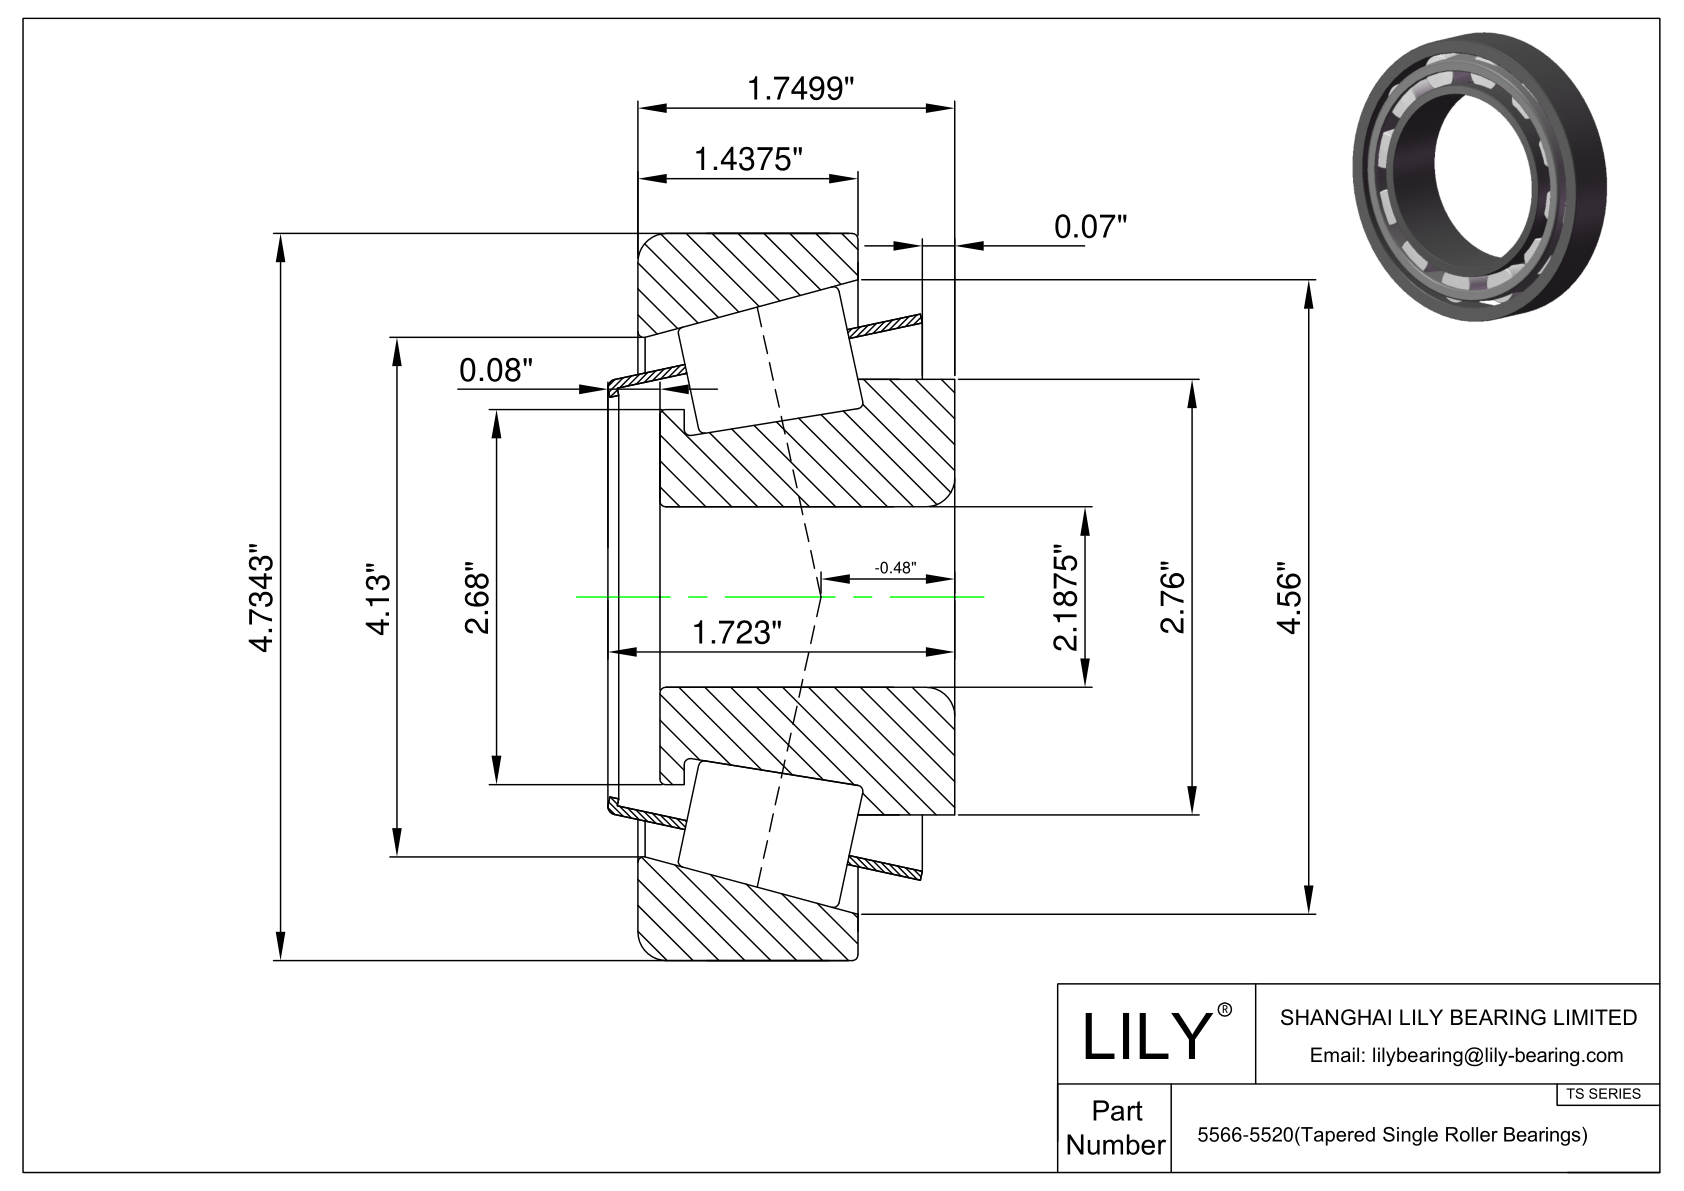 5566-5520 TS (Tapered Single Roller Bearings) (Imperial) cad drawing